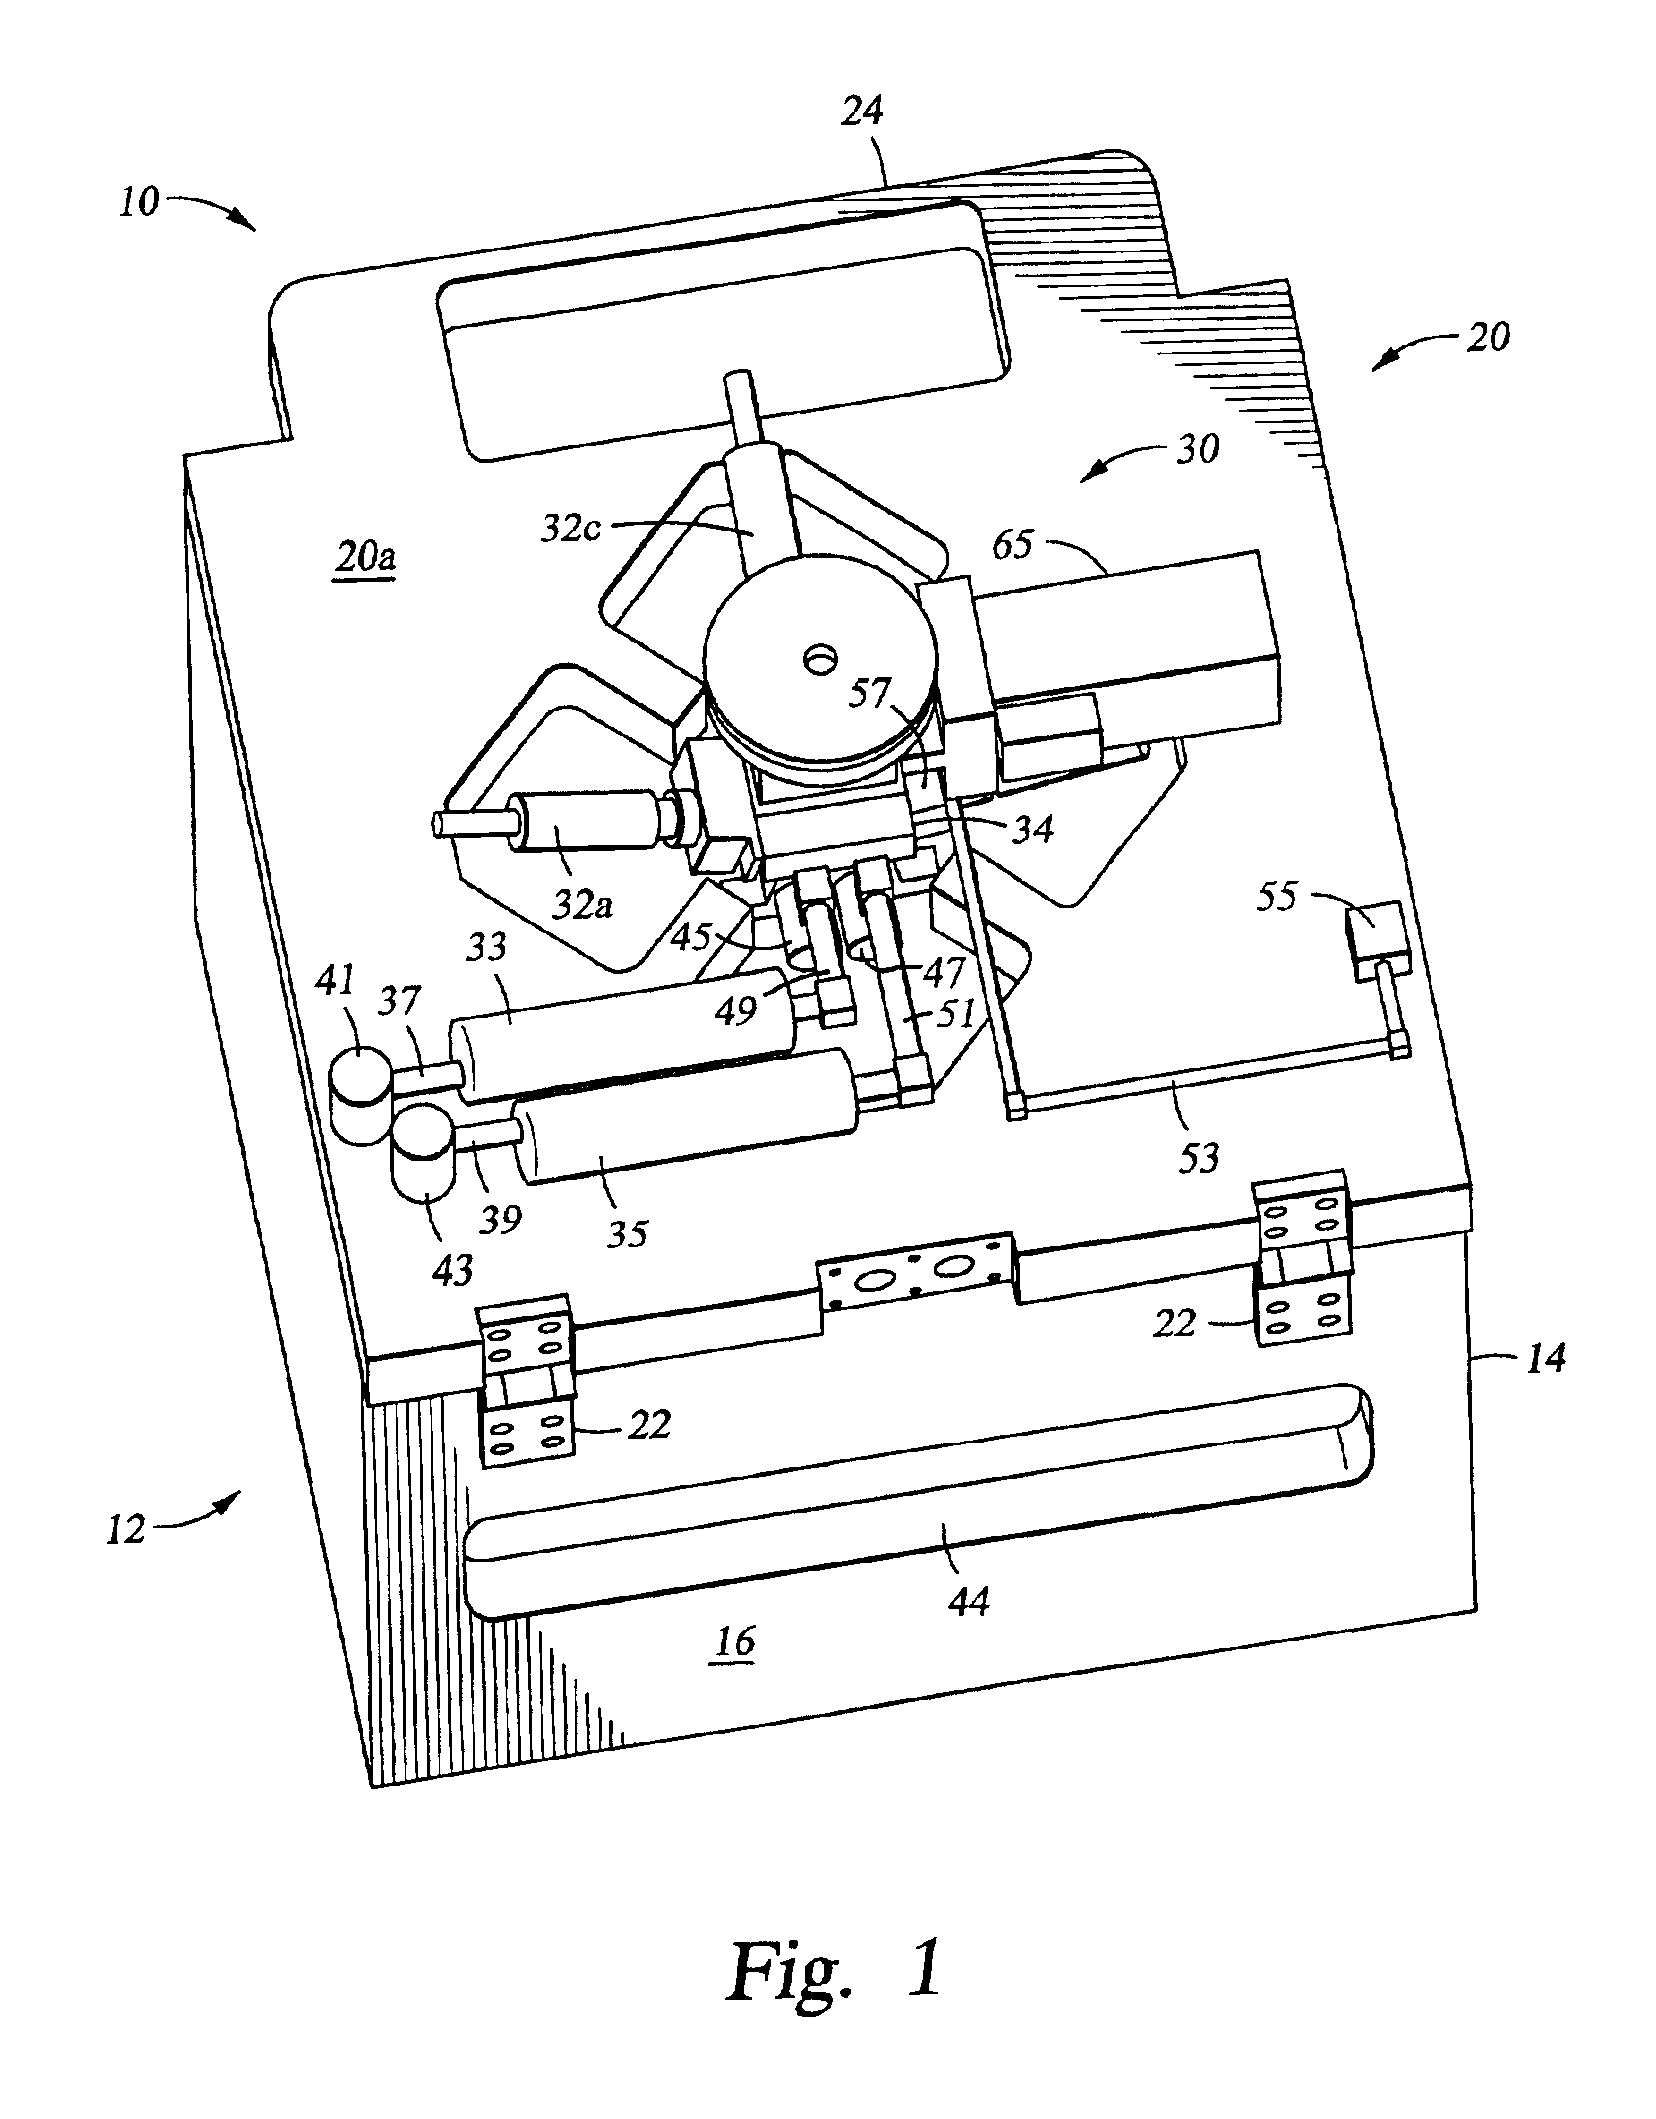 Lid assembly for a processing system to facilitate sequential deposition techniques